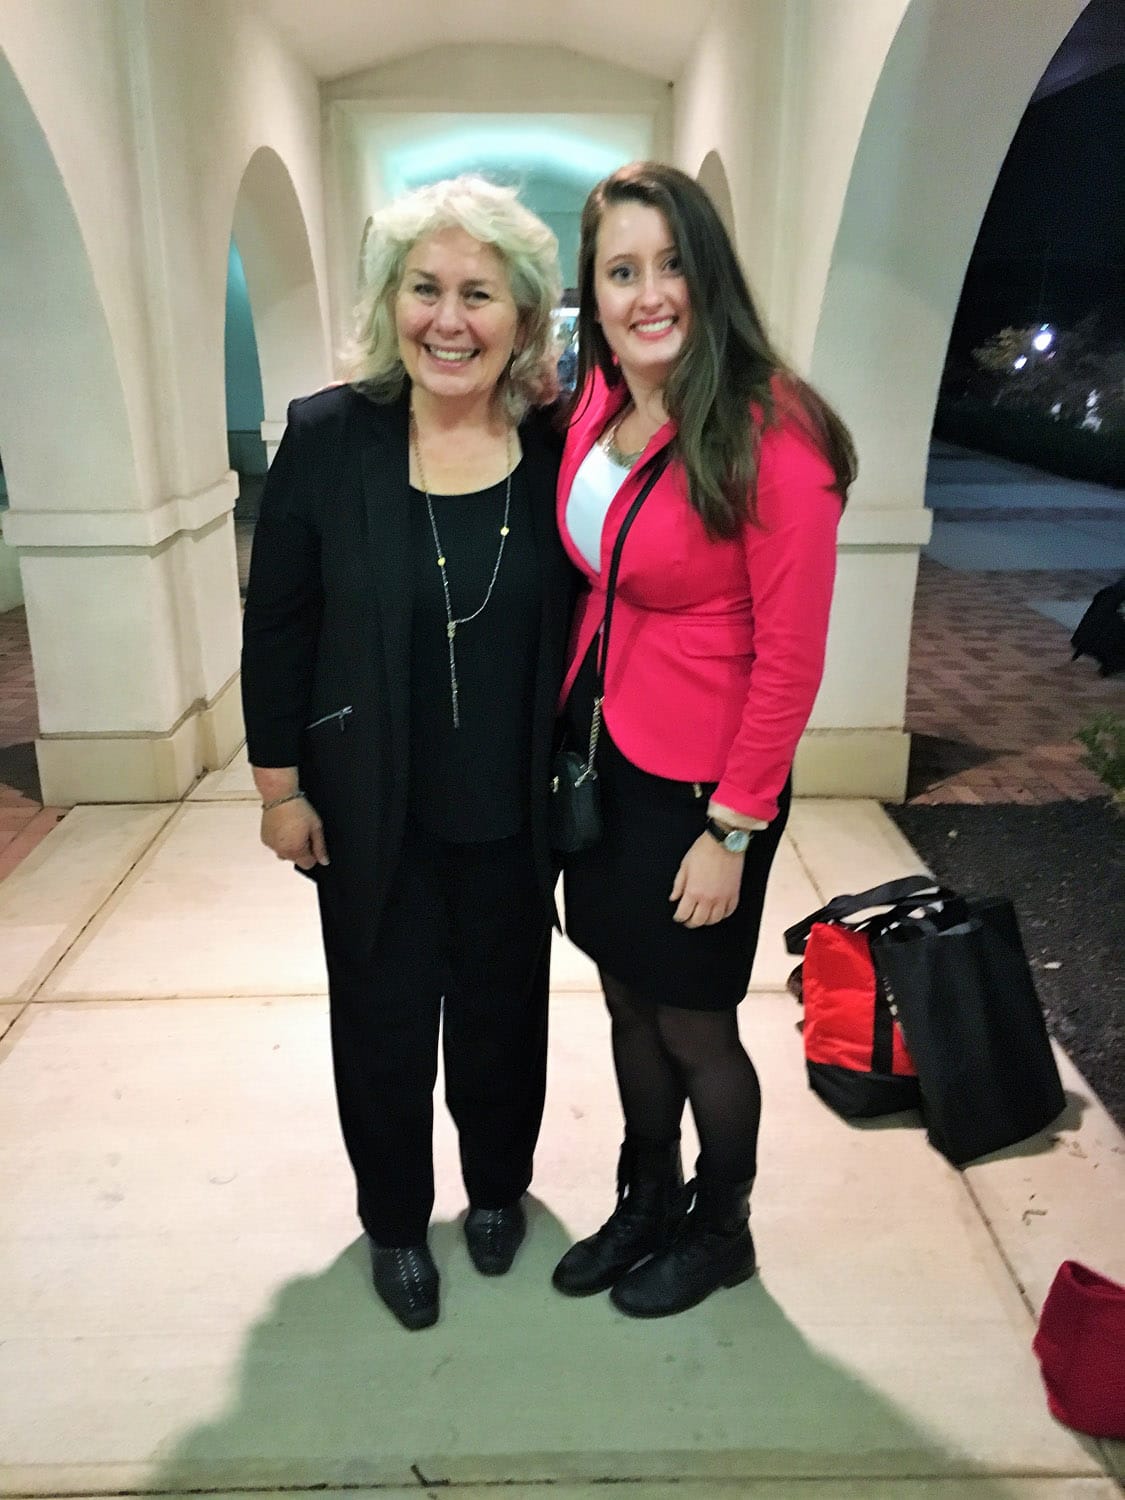 Managing director of ReelAbilities: Montclair, Fran Prezant (left), and assistant director for ReelAbilities: Montclair, Kaitlin Fitzpatrick (right), on their way to the reception after a successful second night of the festival. Photo by Carlie Madlinger 